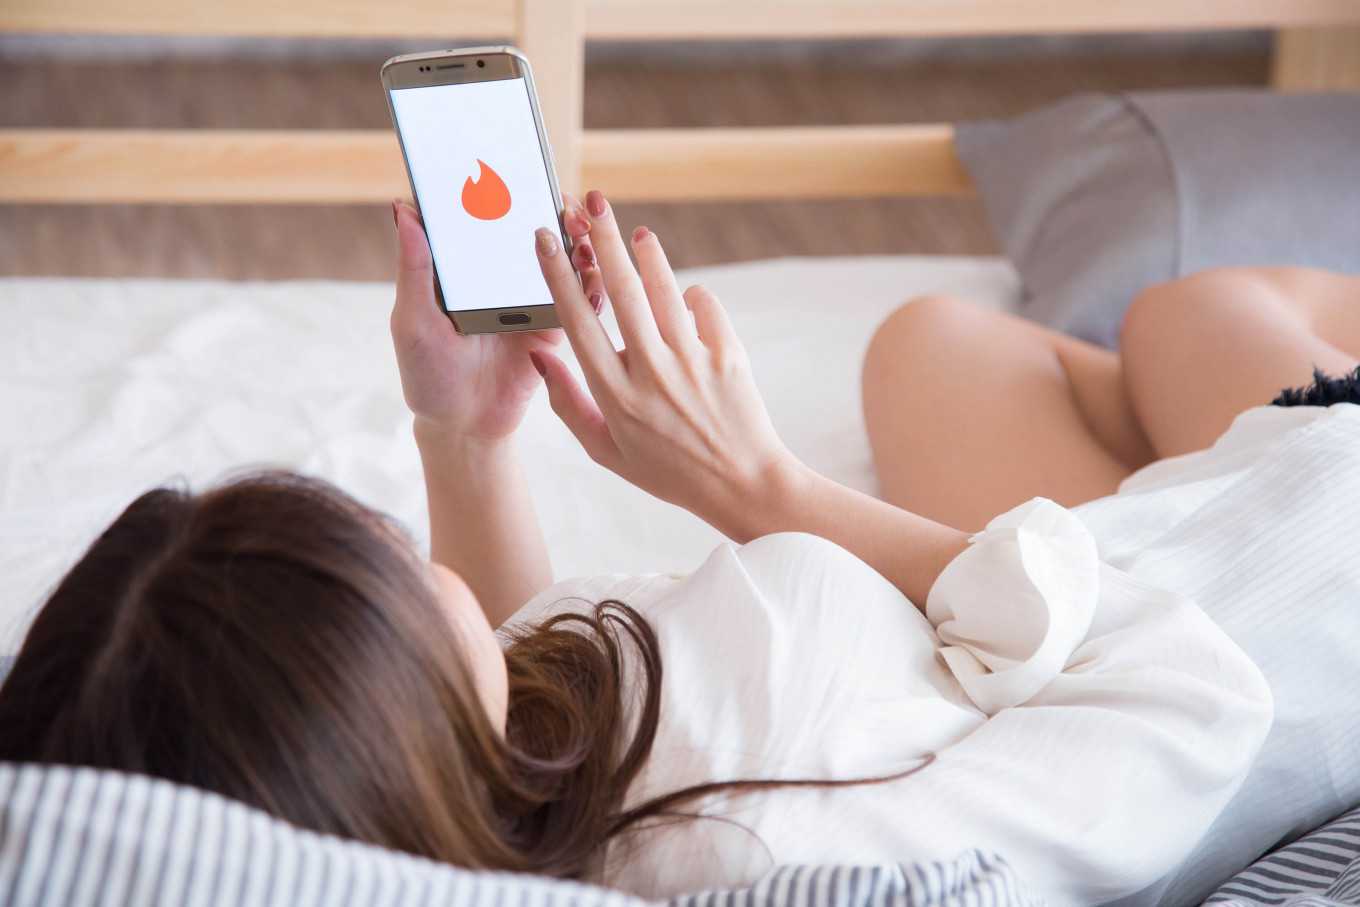 Tinder adds new features as love seekers stay virtual